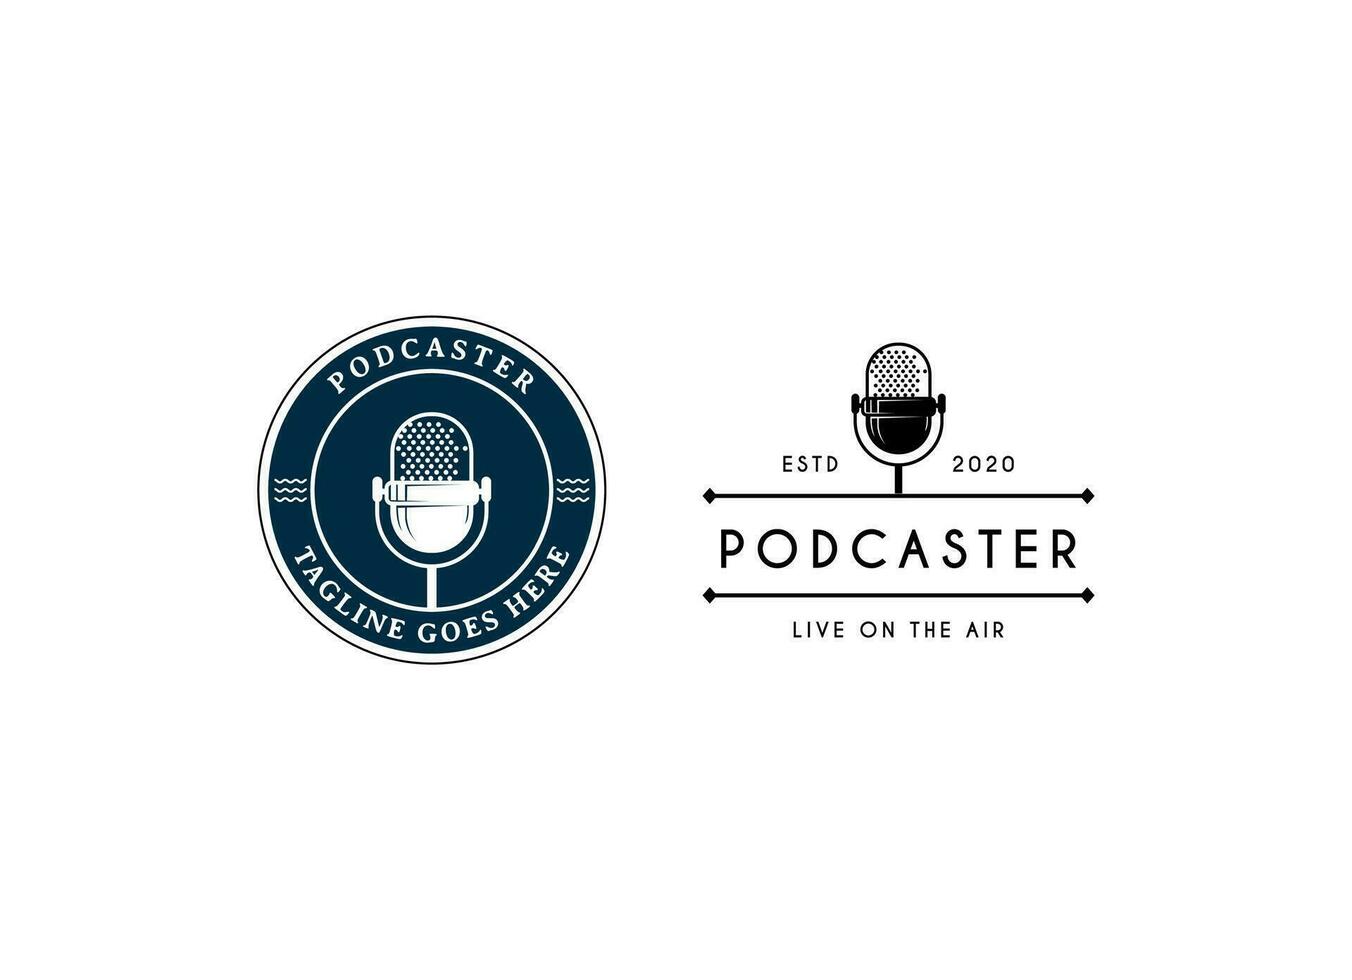 Podcast or Radio Logo design using Microphone and talk icon vector